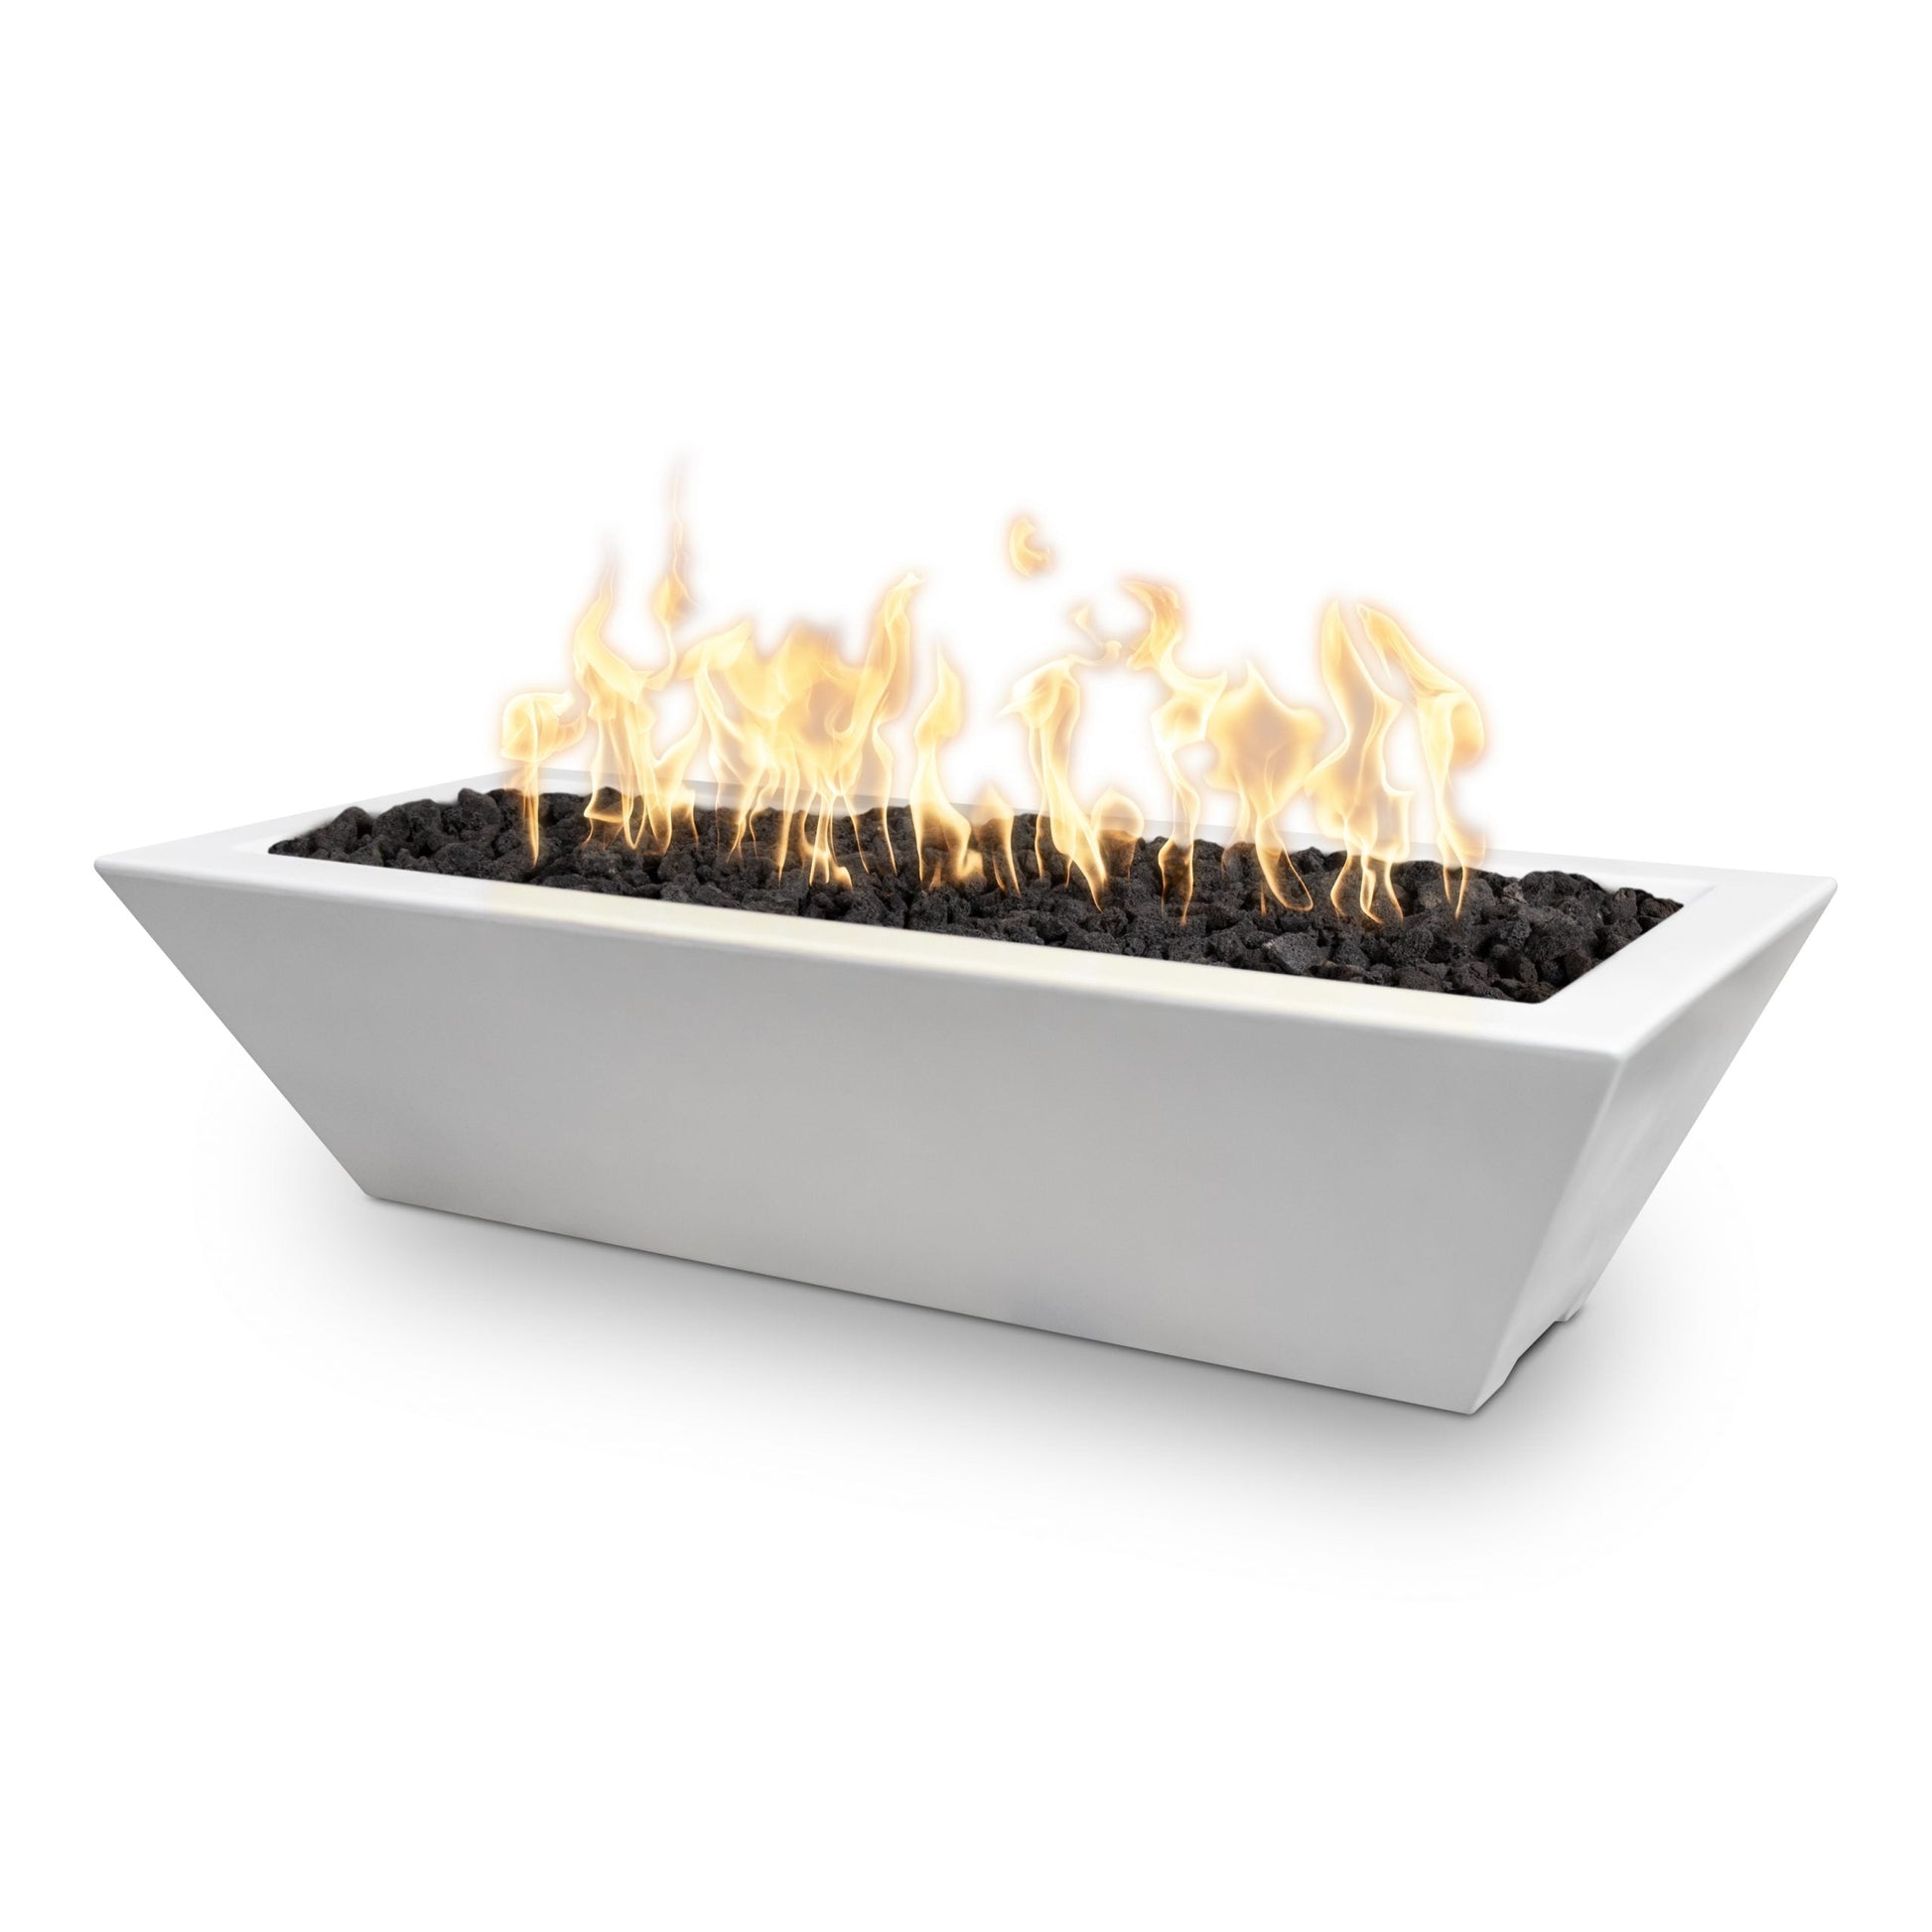 The Outdoor Plus Linear Maya 60" Metallic Copper GFRC Concrete Liquid Propane Fire Bowl with 12V Electronic Ignition